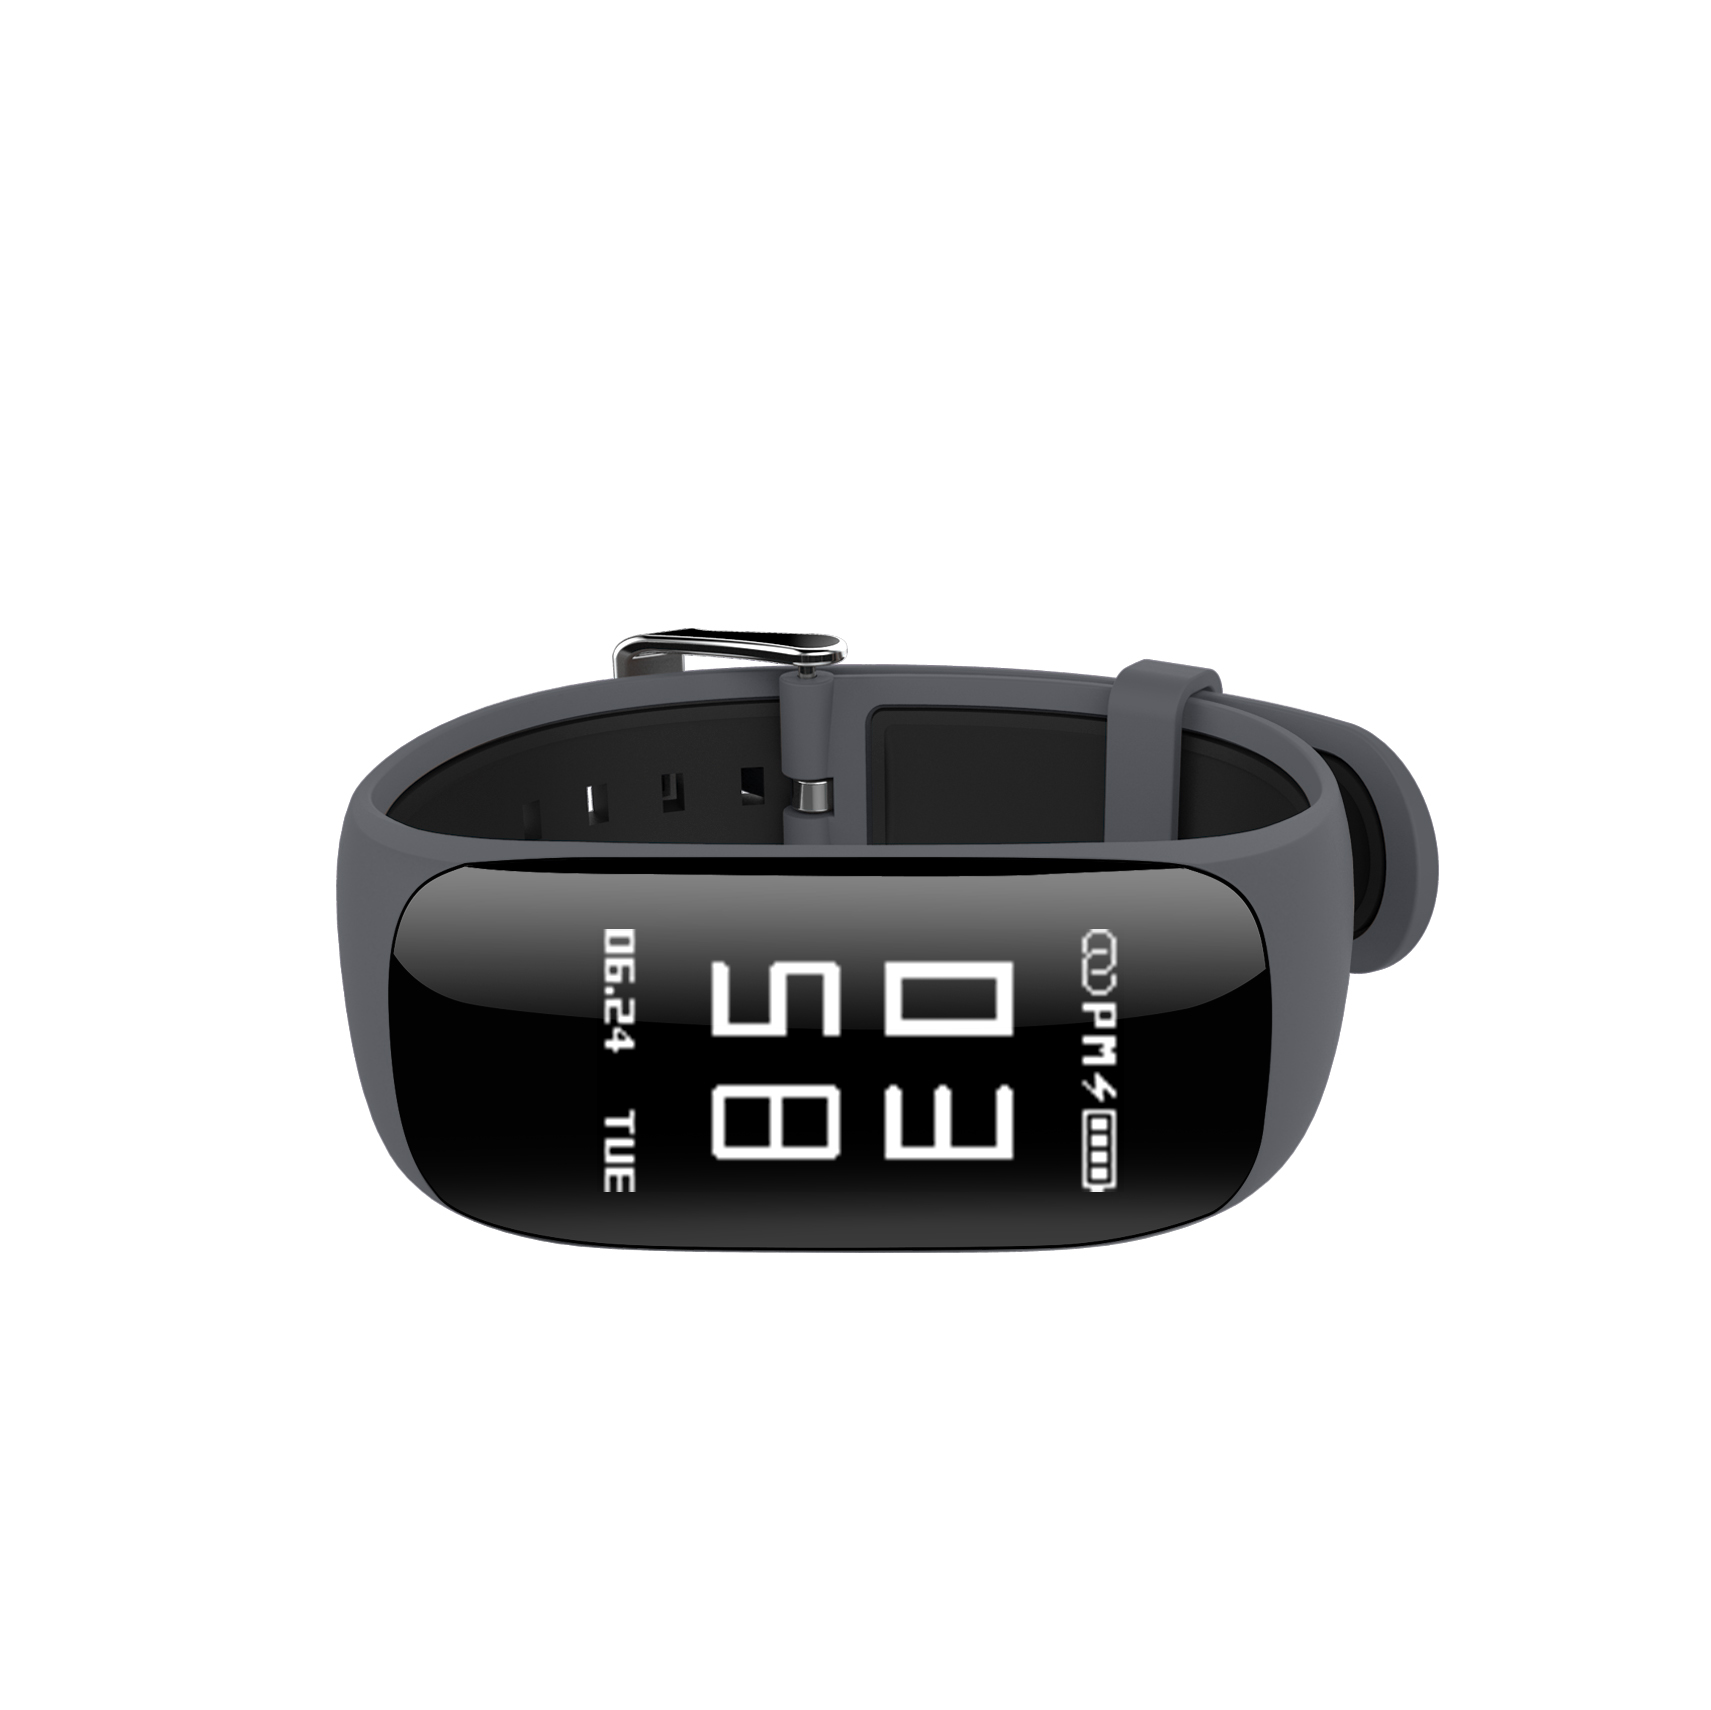 Find Bakeey Z17 0.96inch OLED HR Monitor Real-Time Route Tracking Sleep Monitor Sport Smart Bracelet for Sale on Gipsybee.com with cryptocurrencies